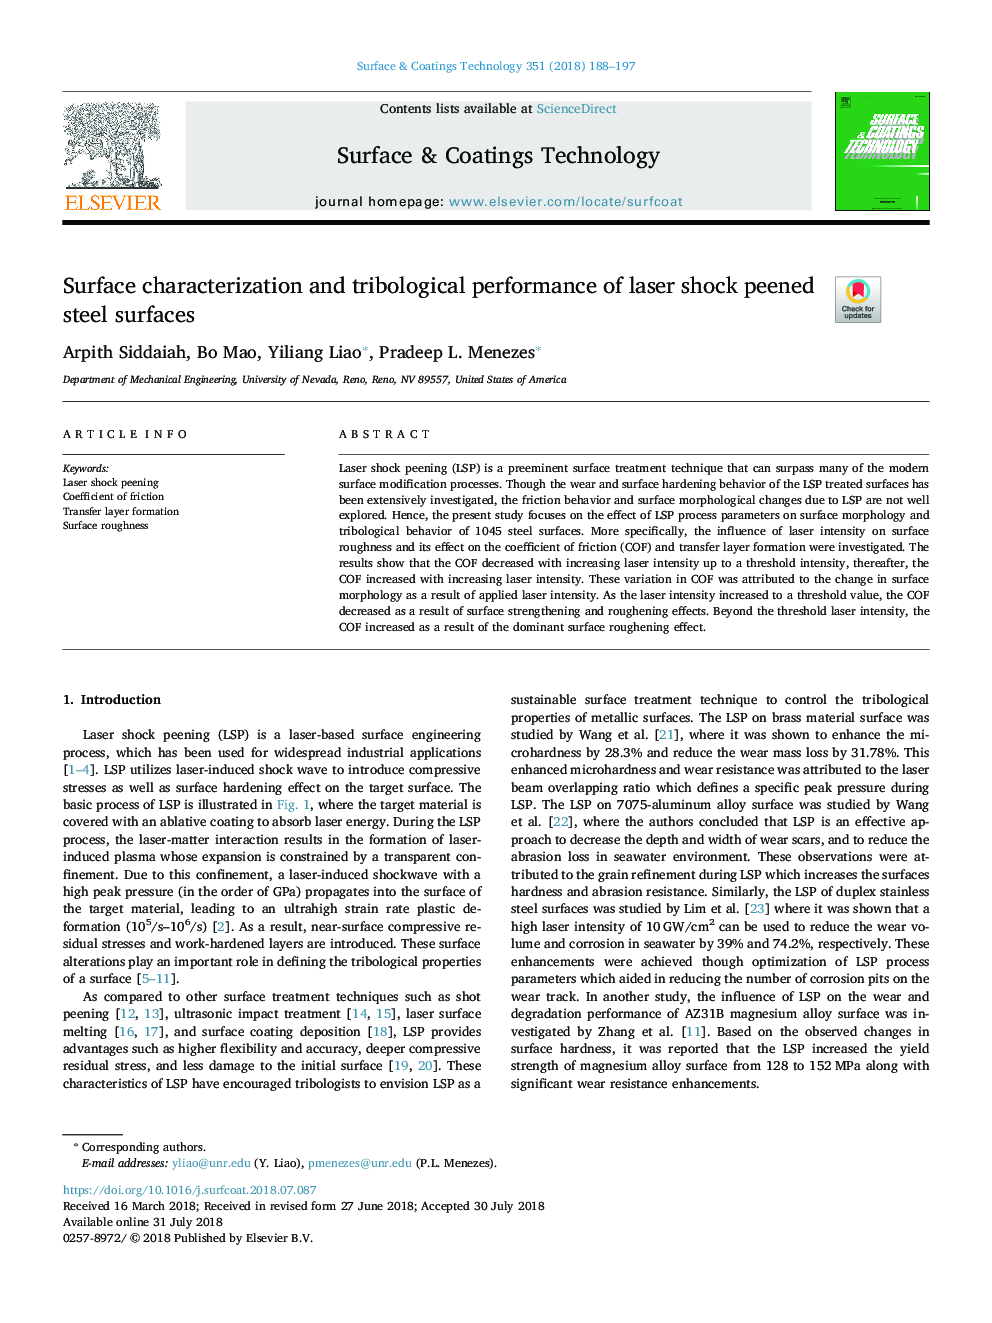 Surface characterization and tribological performance of laser shock peened steel surfaces